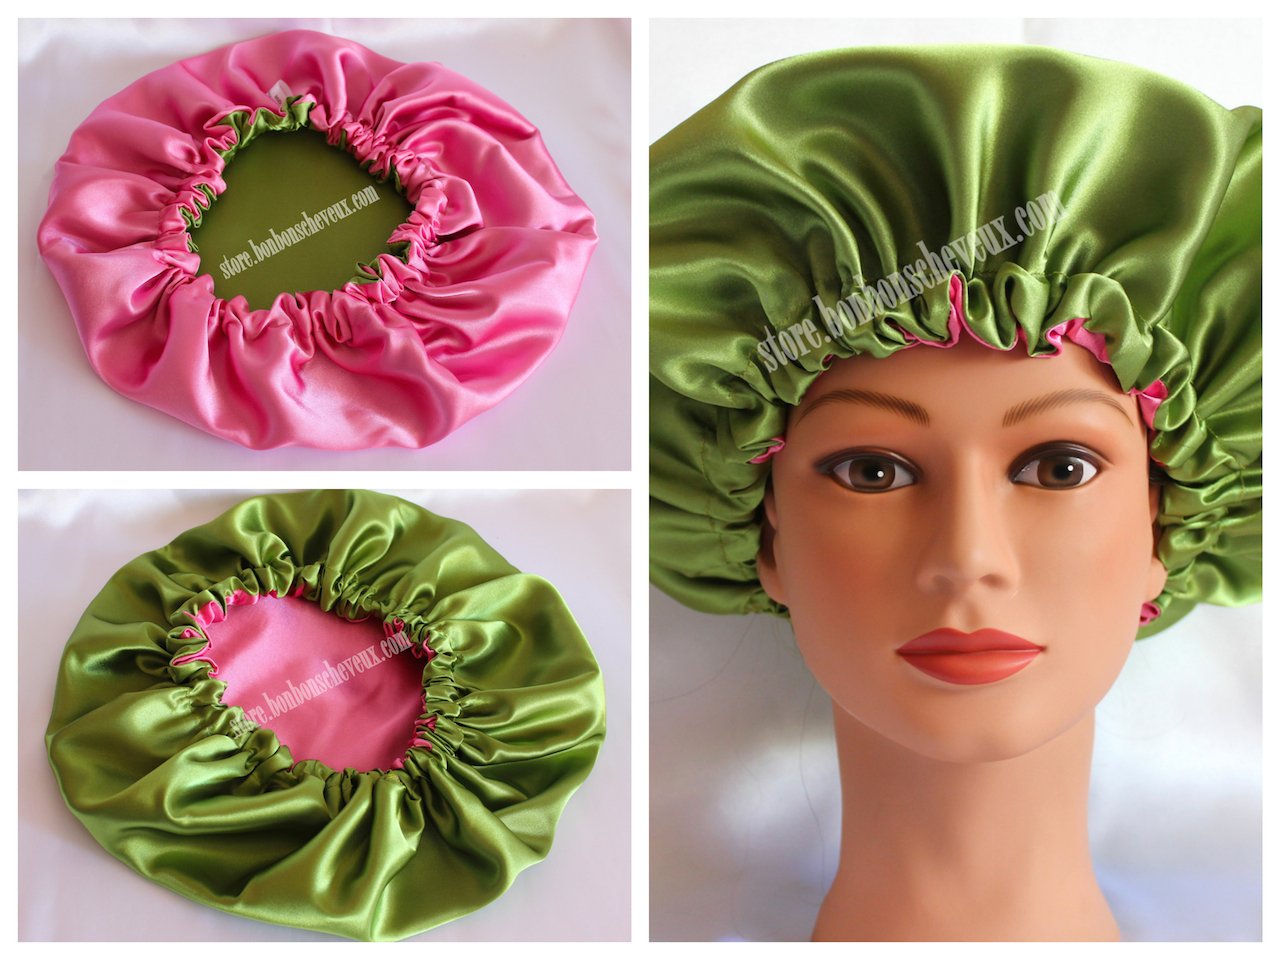 Designer Bonnets – Candy Lips by Cai